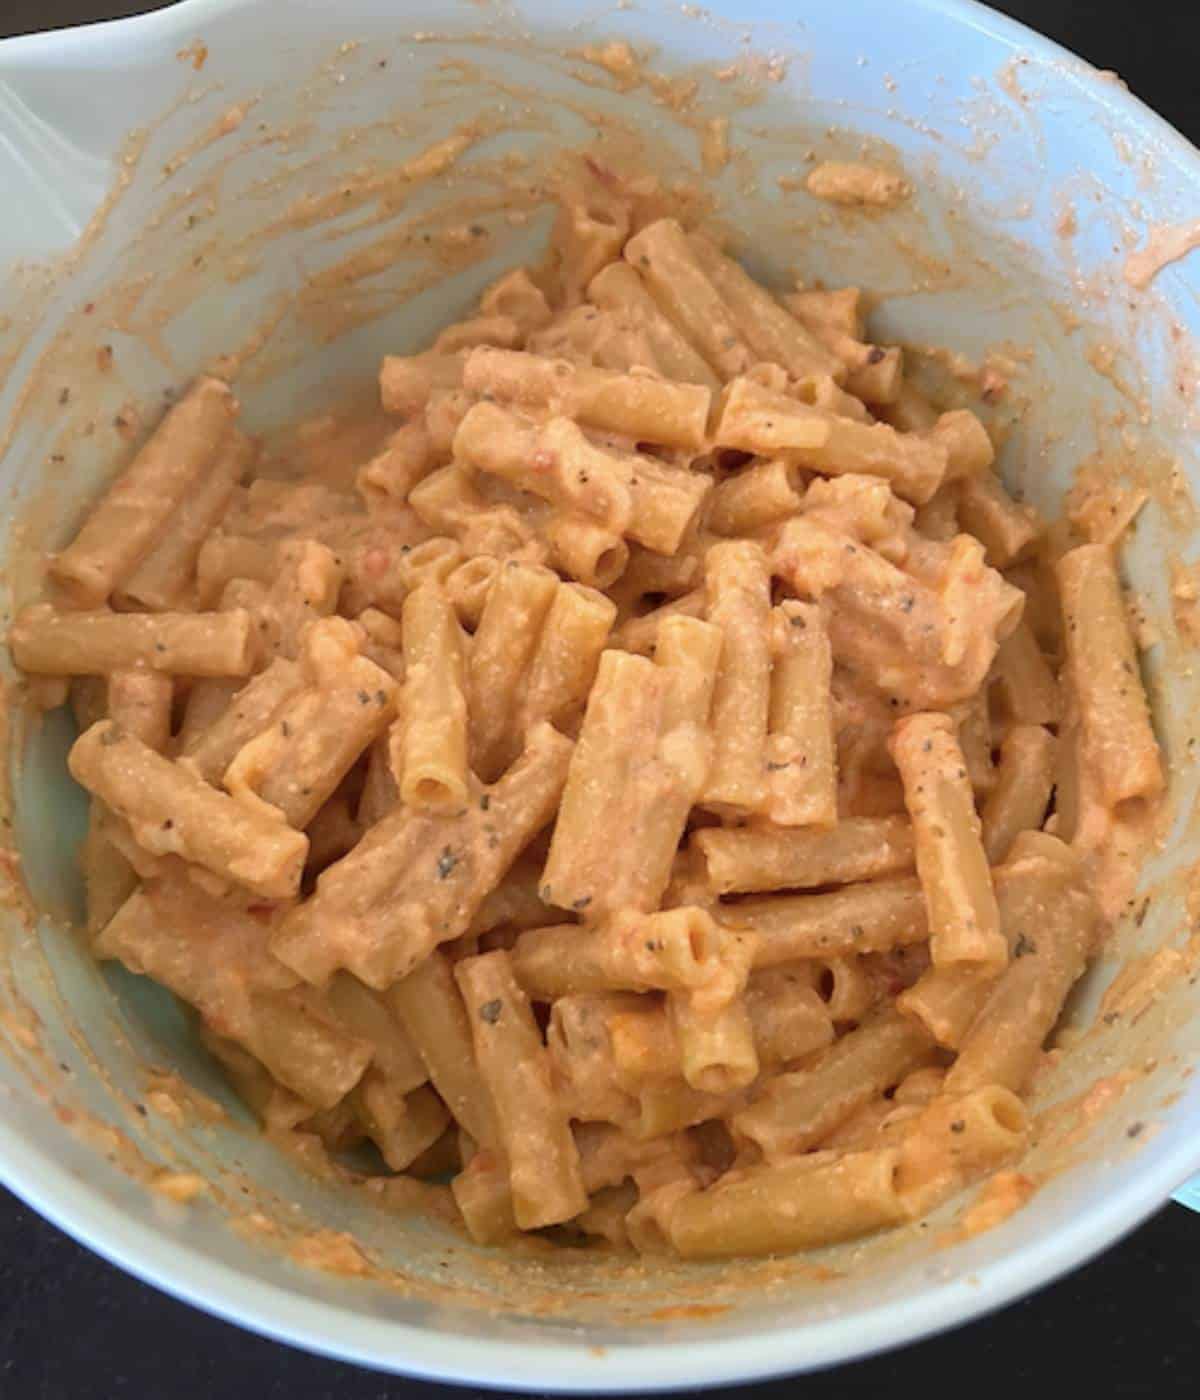 Ziti tossed in cheesy filling.